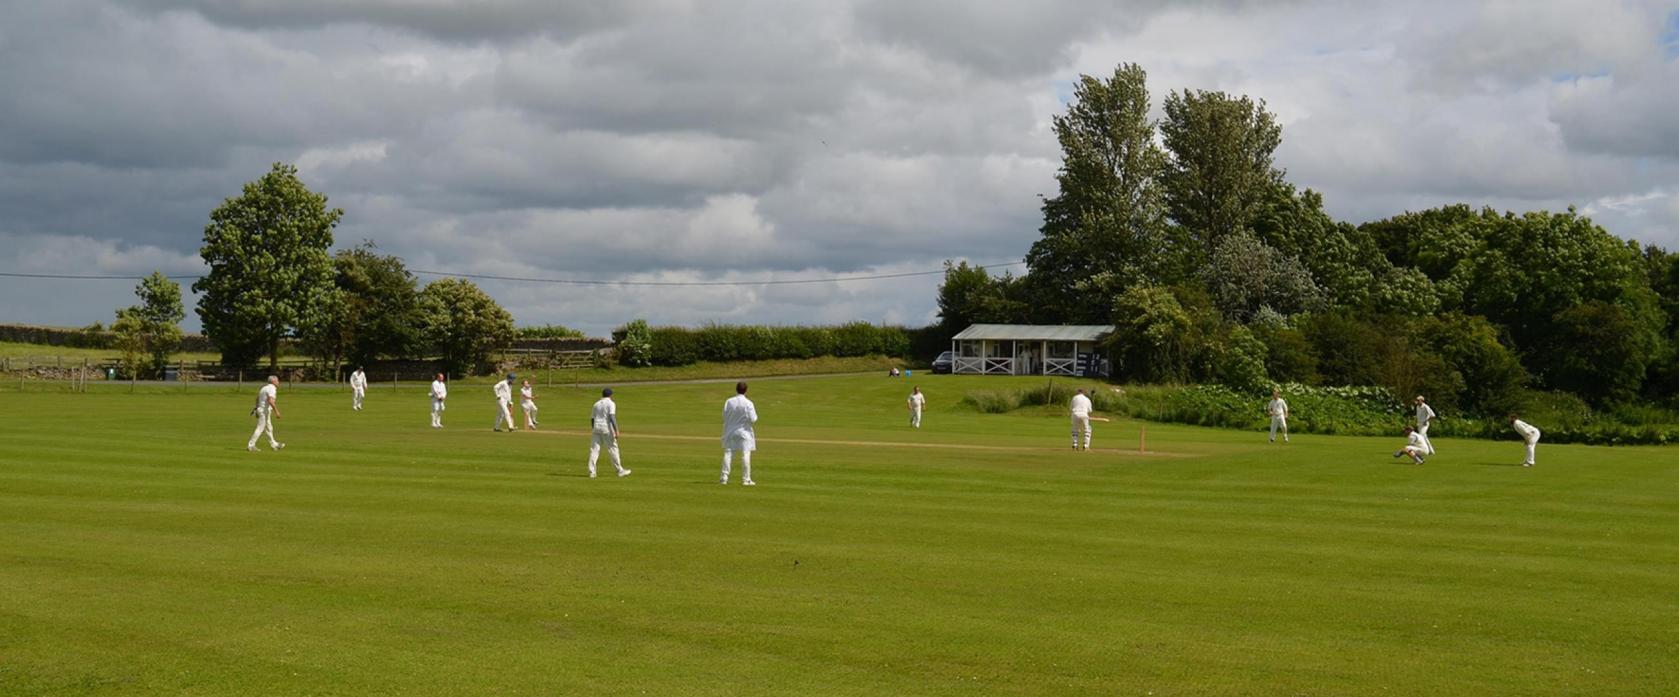 READY FOR ACTION: The new village cricket season starts this weekend